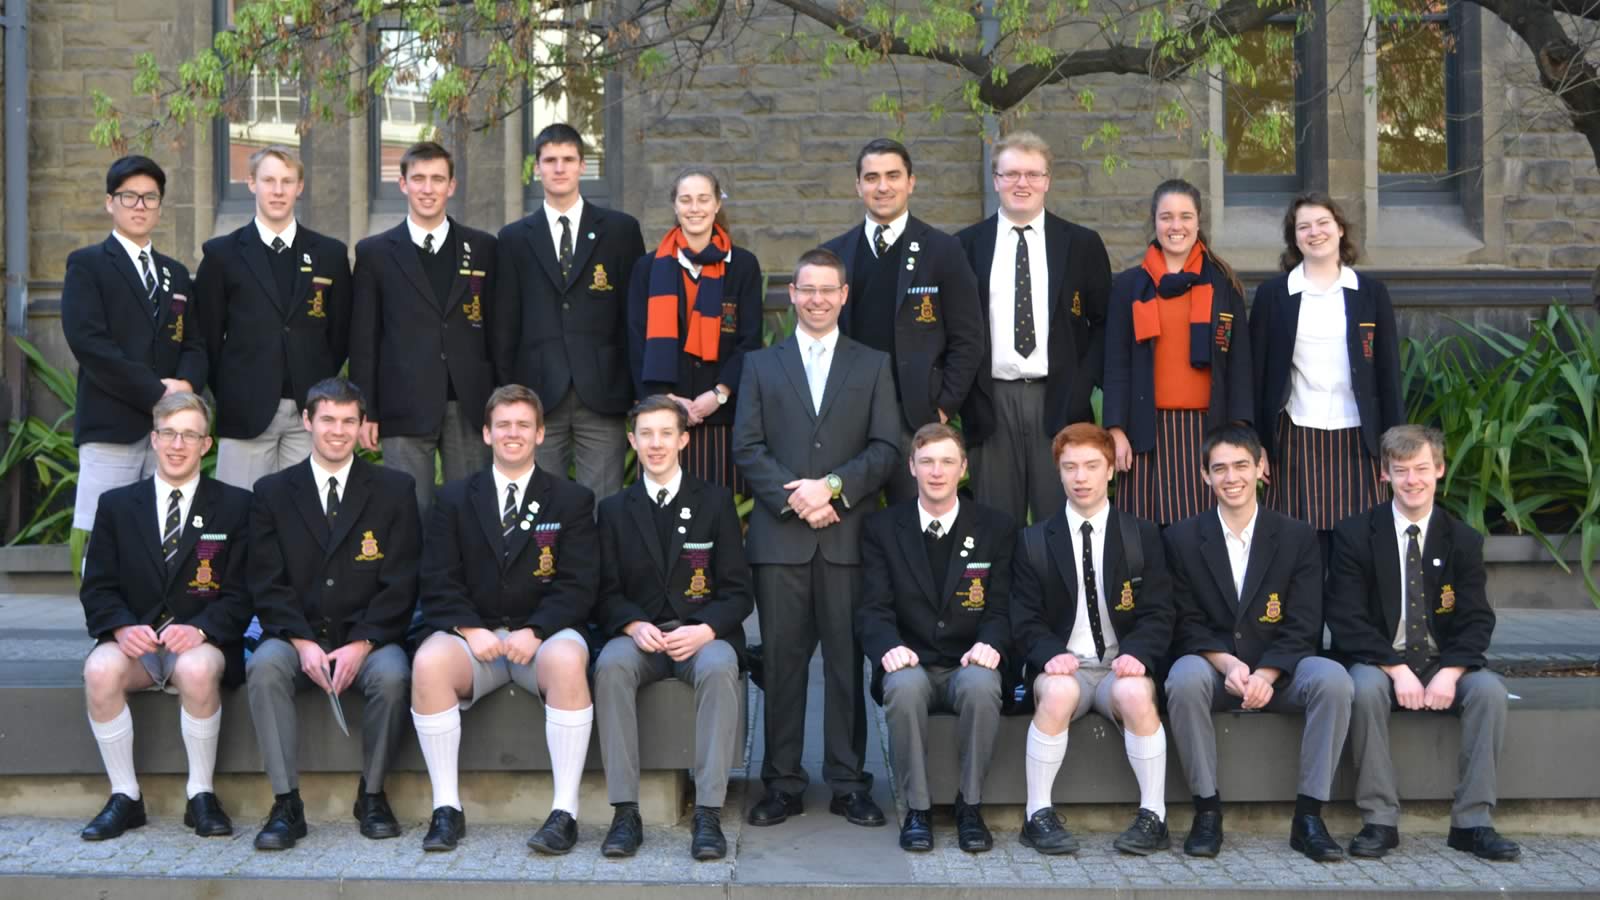 Year 12 Physics Melbourne trip group photo (large)